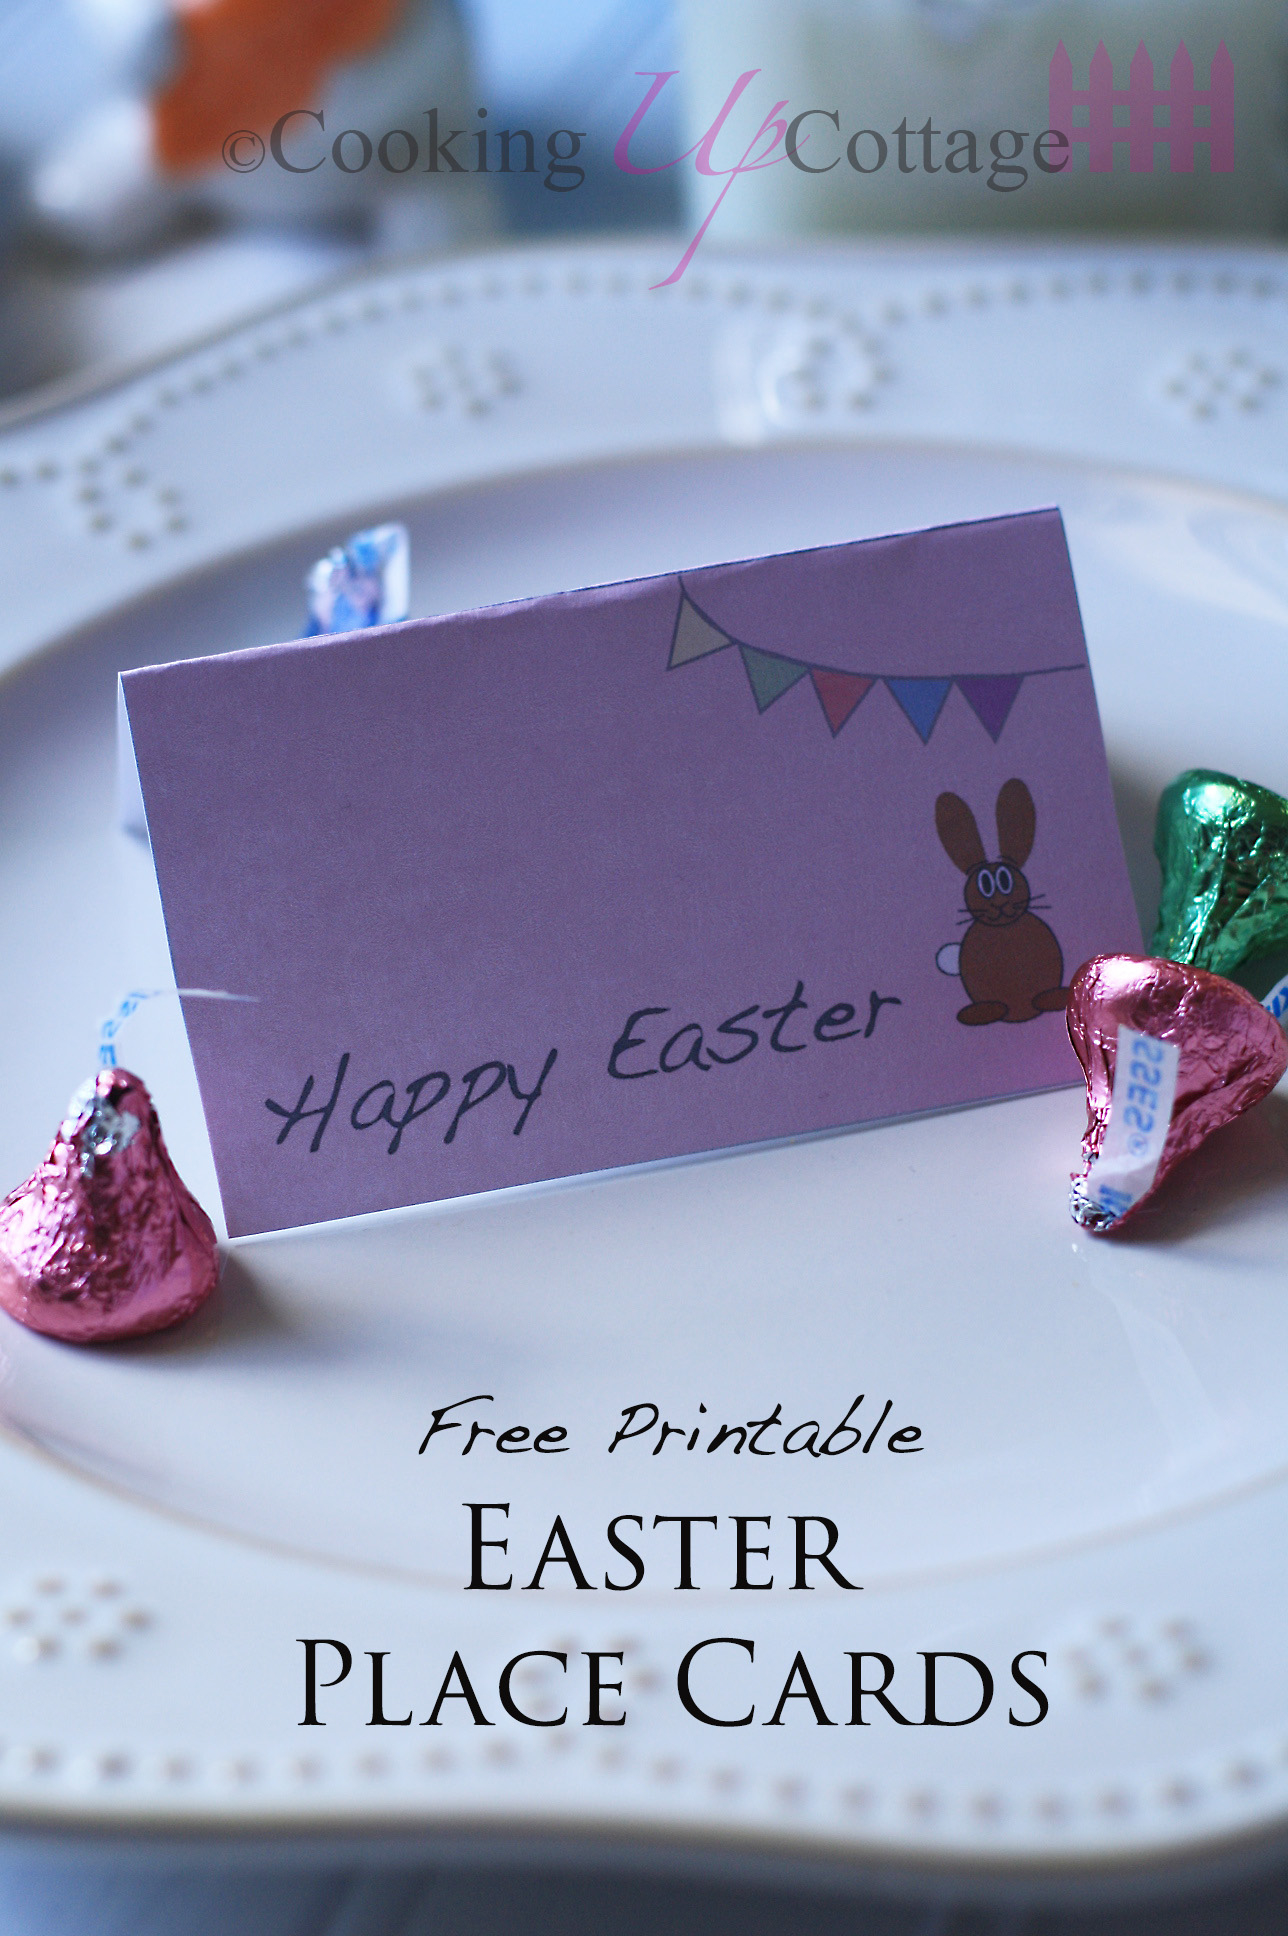 Free Printable Easter Place Cards – Cooking Up Cottage pertaining to Free Easter Place Cards Printable